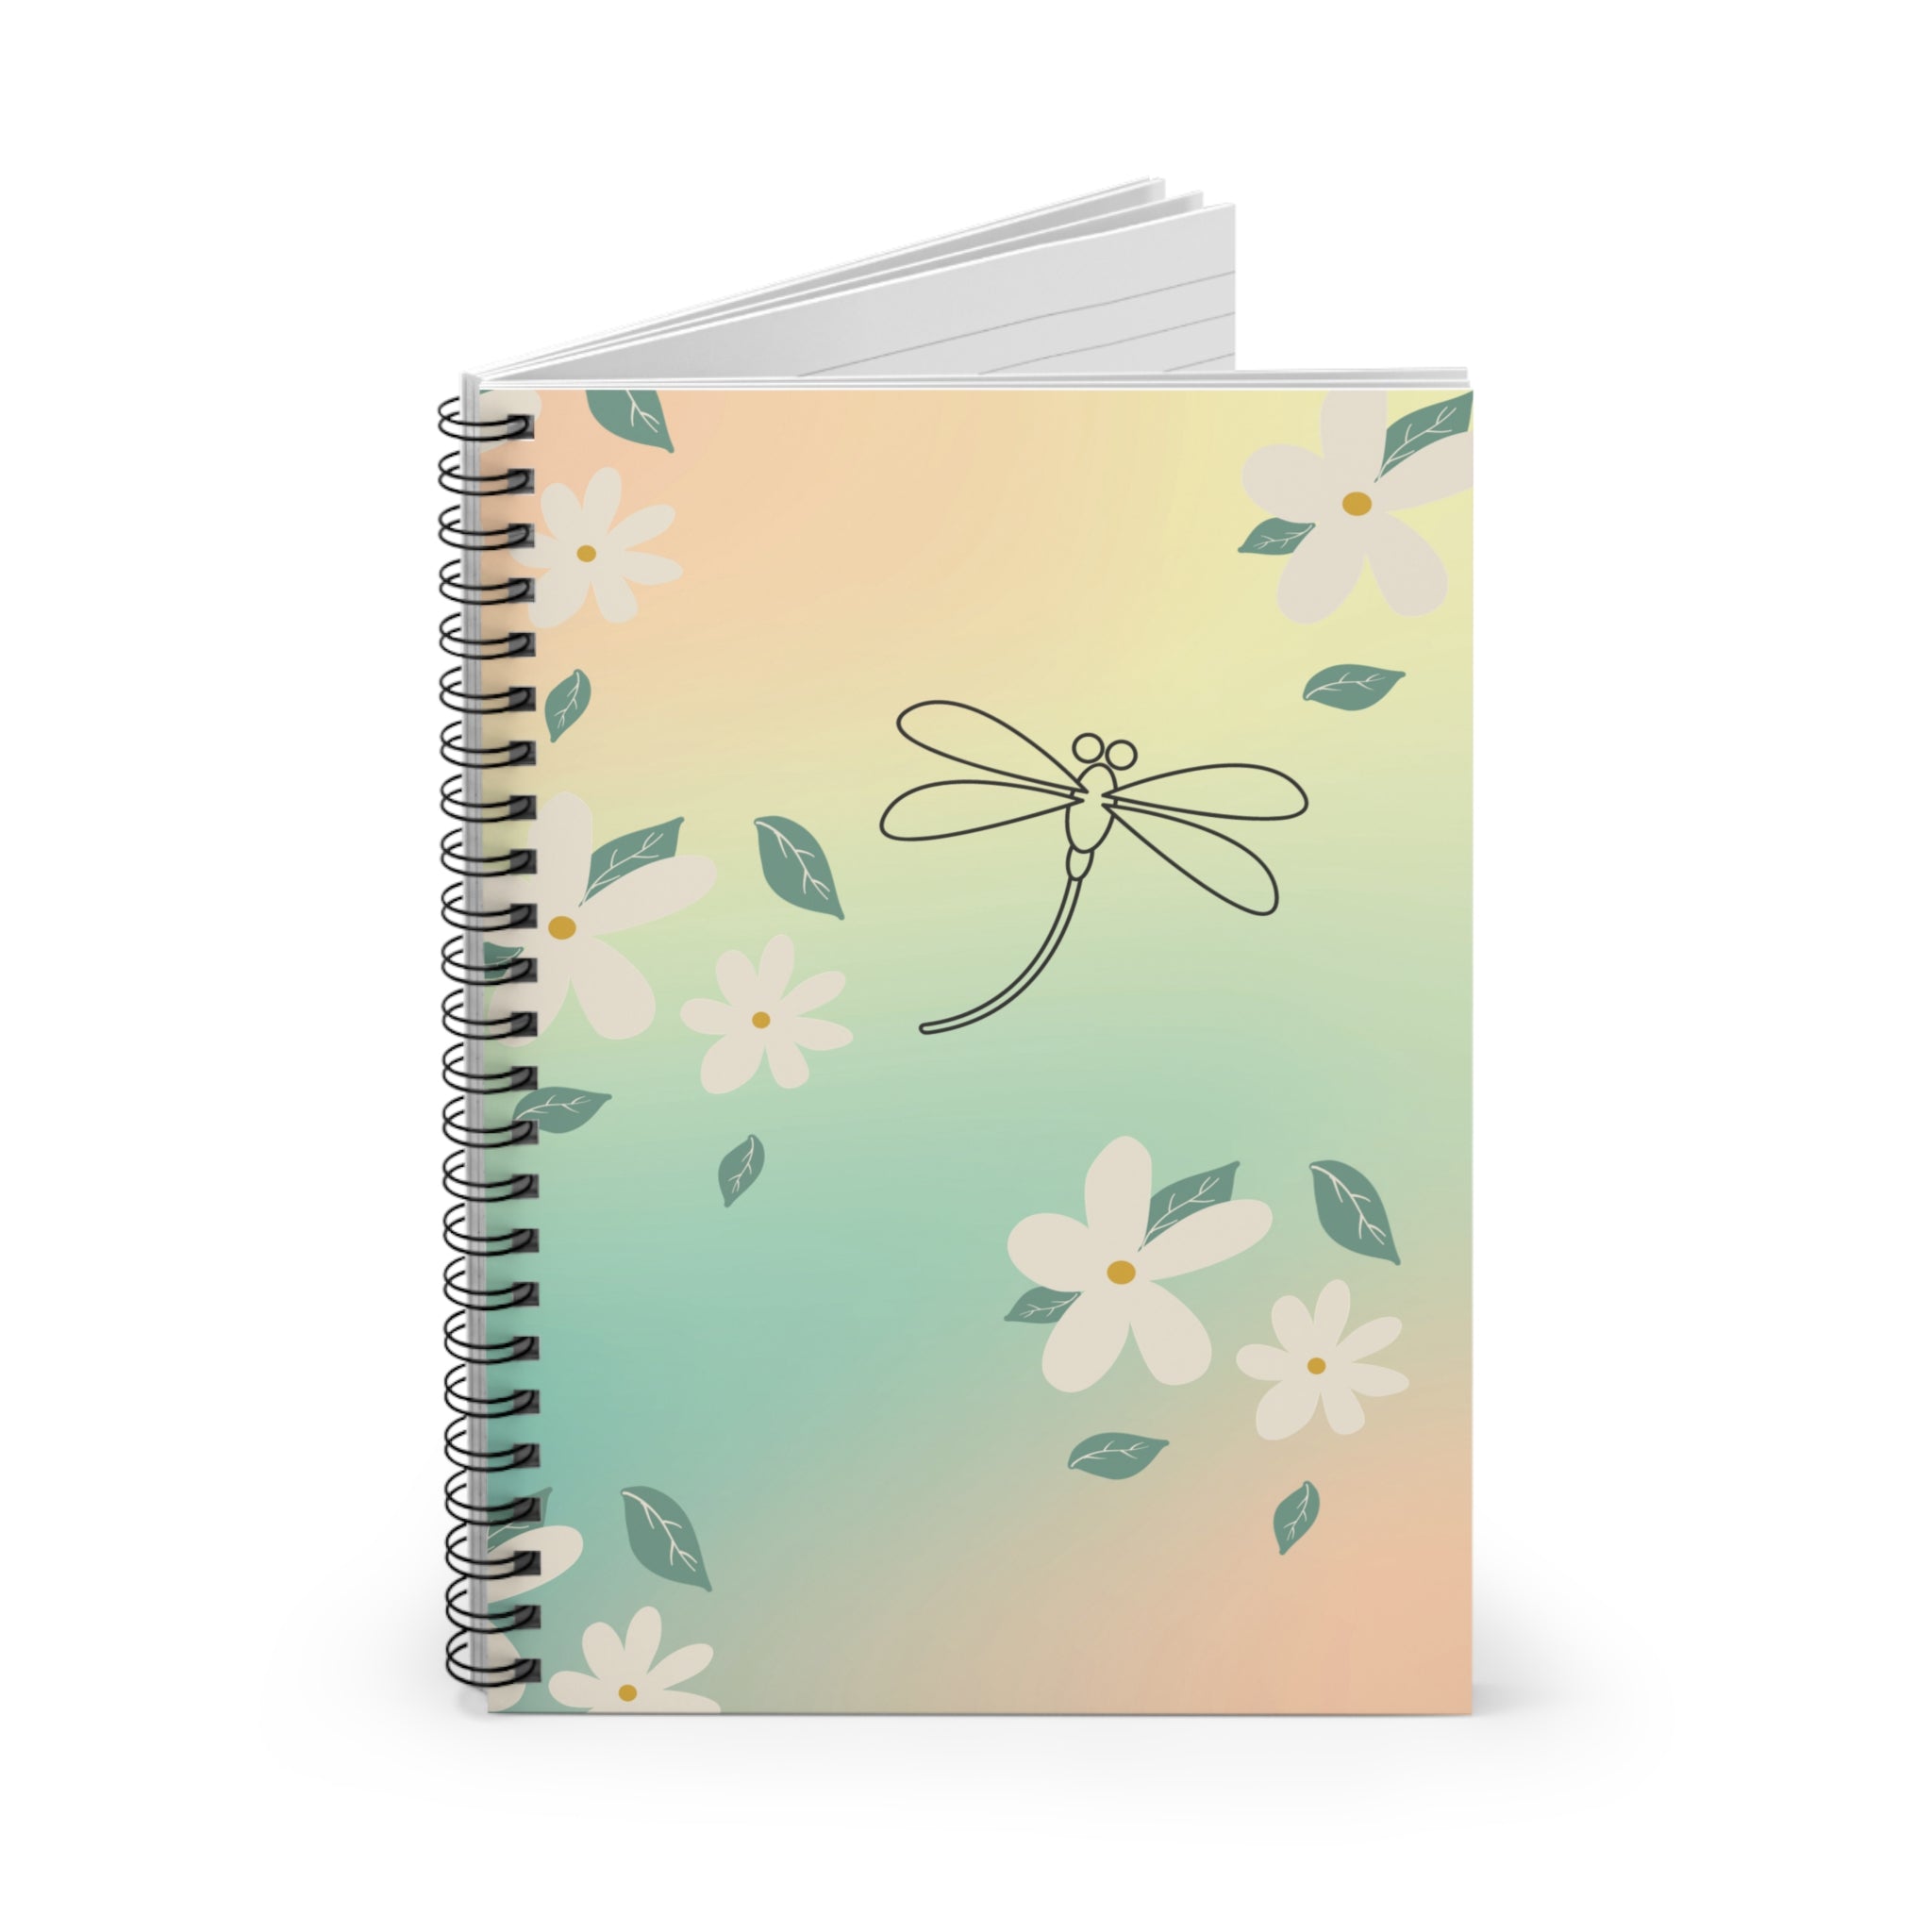 Dragonfly Spiral Notebook - Ruled Line